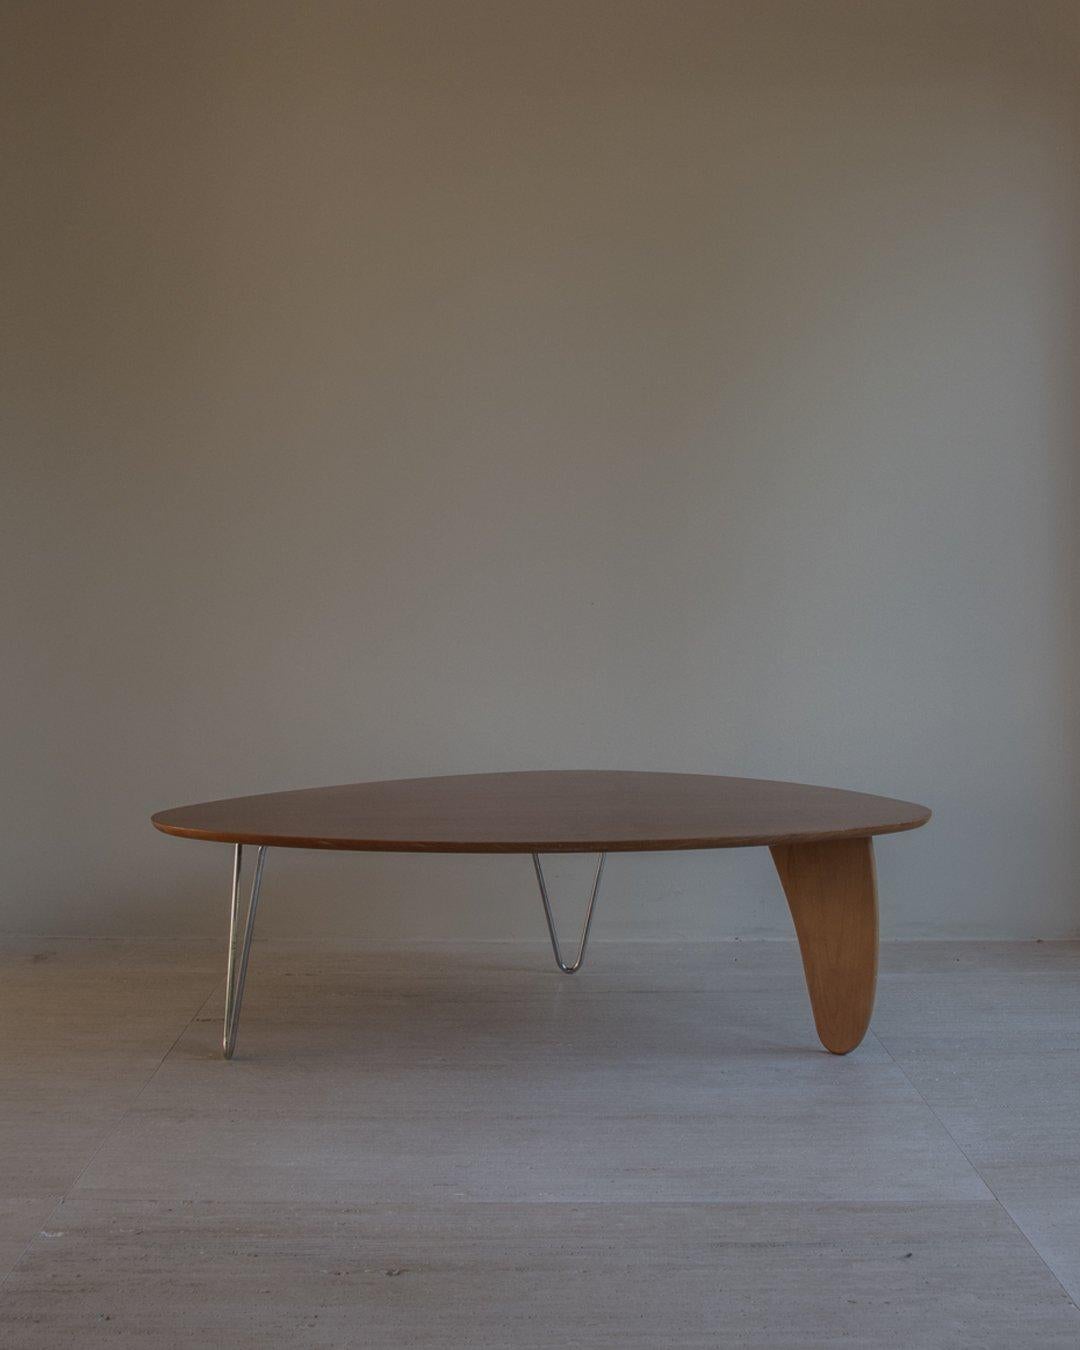 Rudder coffee table, model IN-52, designed in 1944 by Isamu Noguchi - produced circa the 1970s. Birch wood and veneer table with an amorphic top raised on two chrome hairpin legs and wood blade-shaped support. Apparently unmarked. The Noguchi Rudder